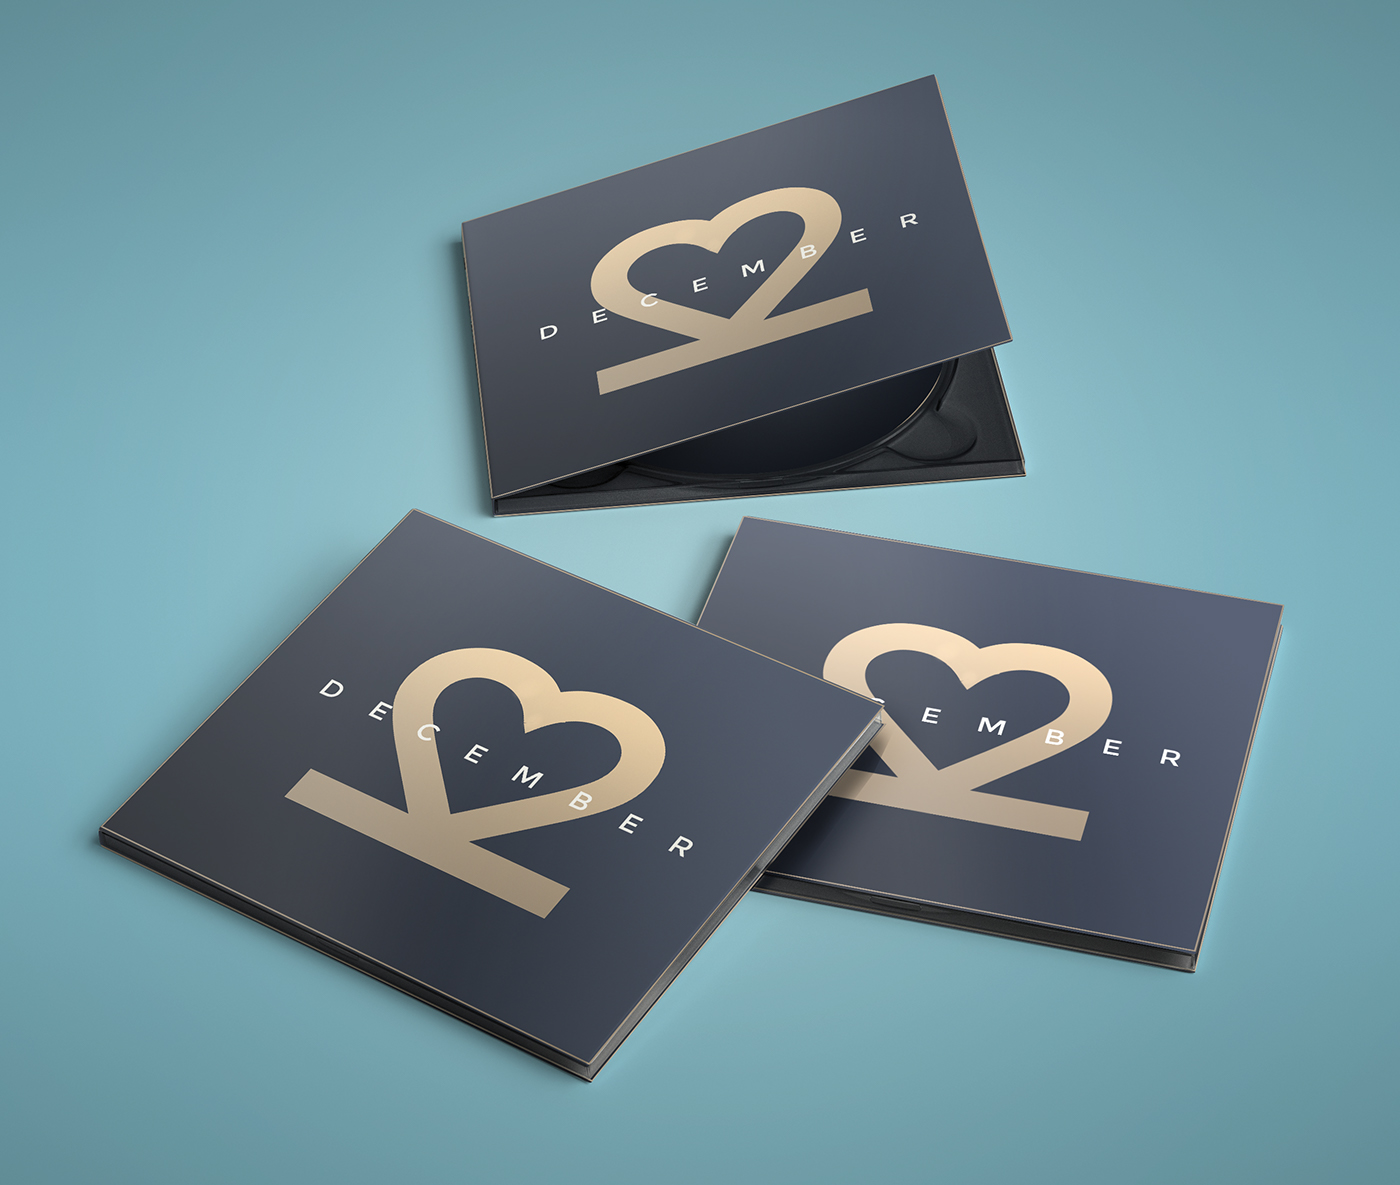 22 December cd project cover Mockup thread design girlfriend gift music